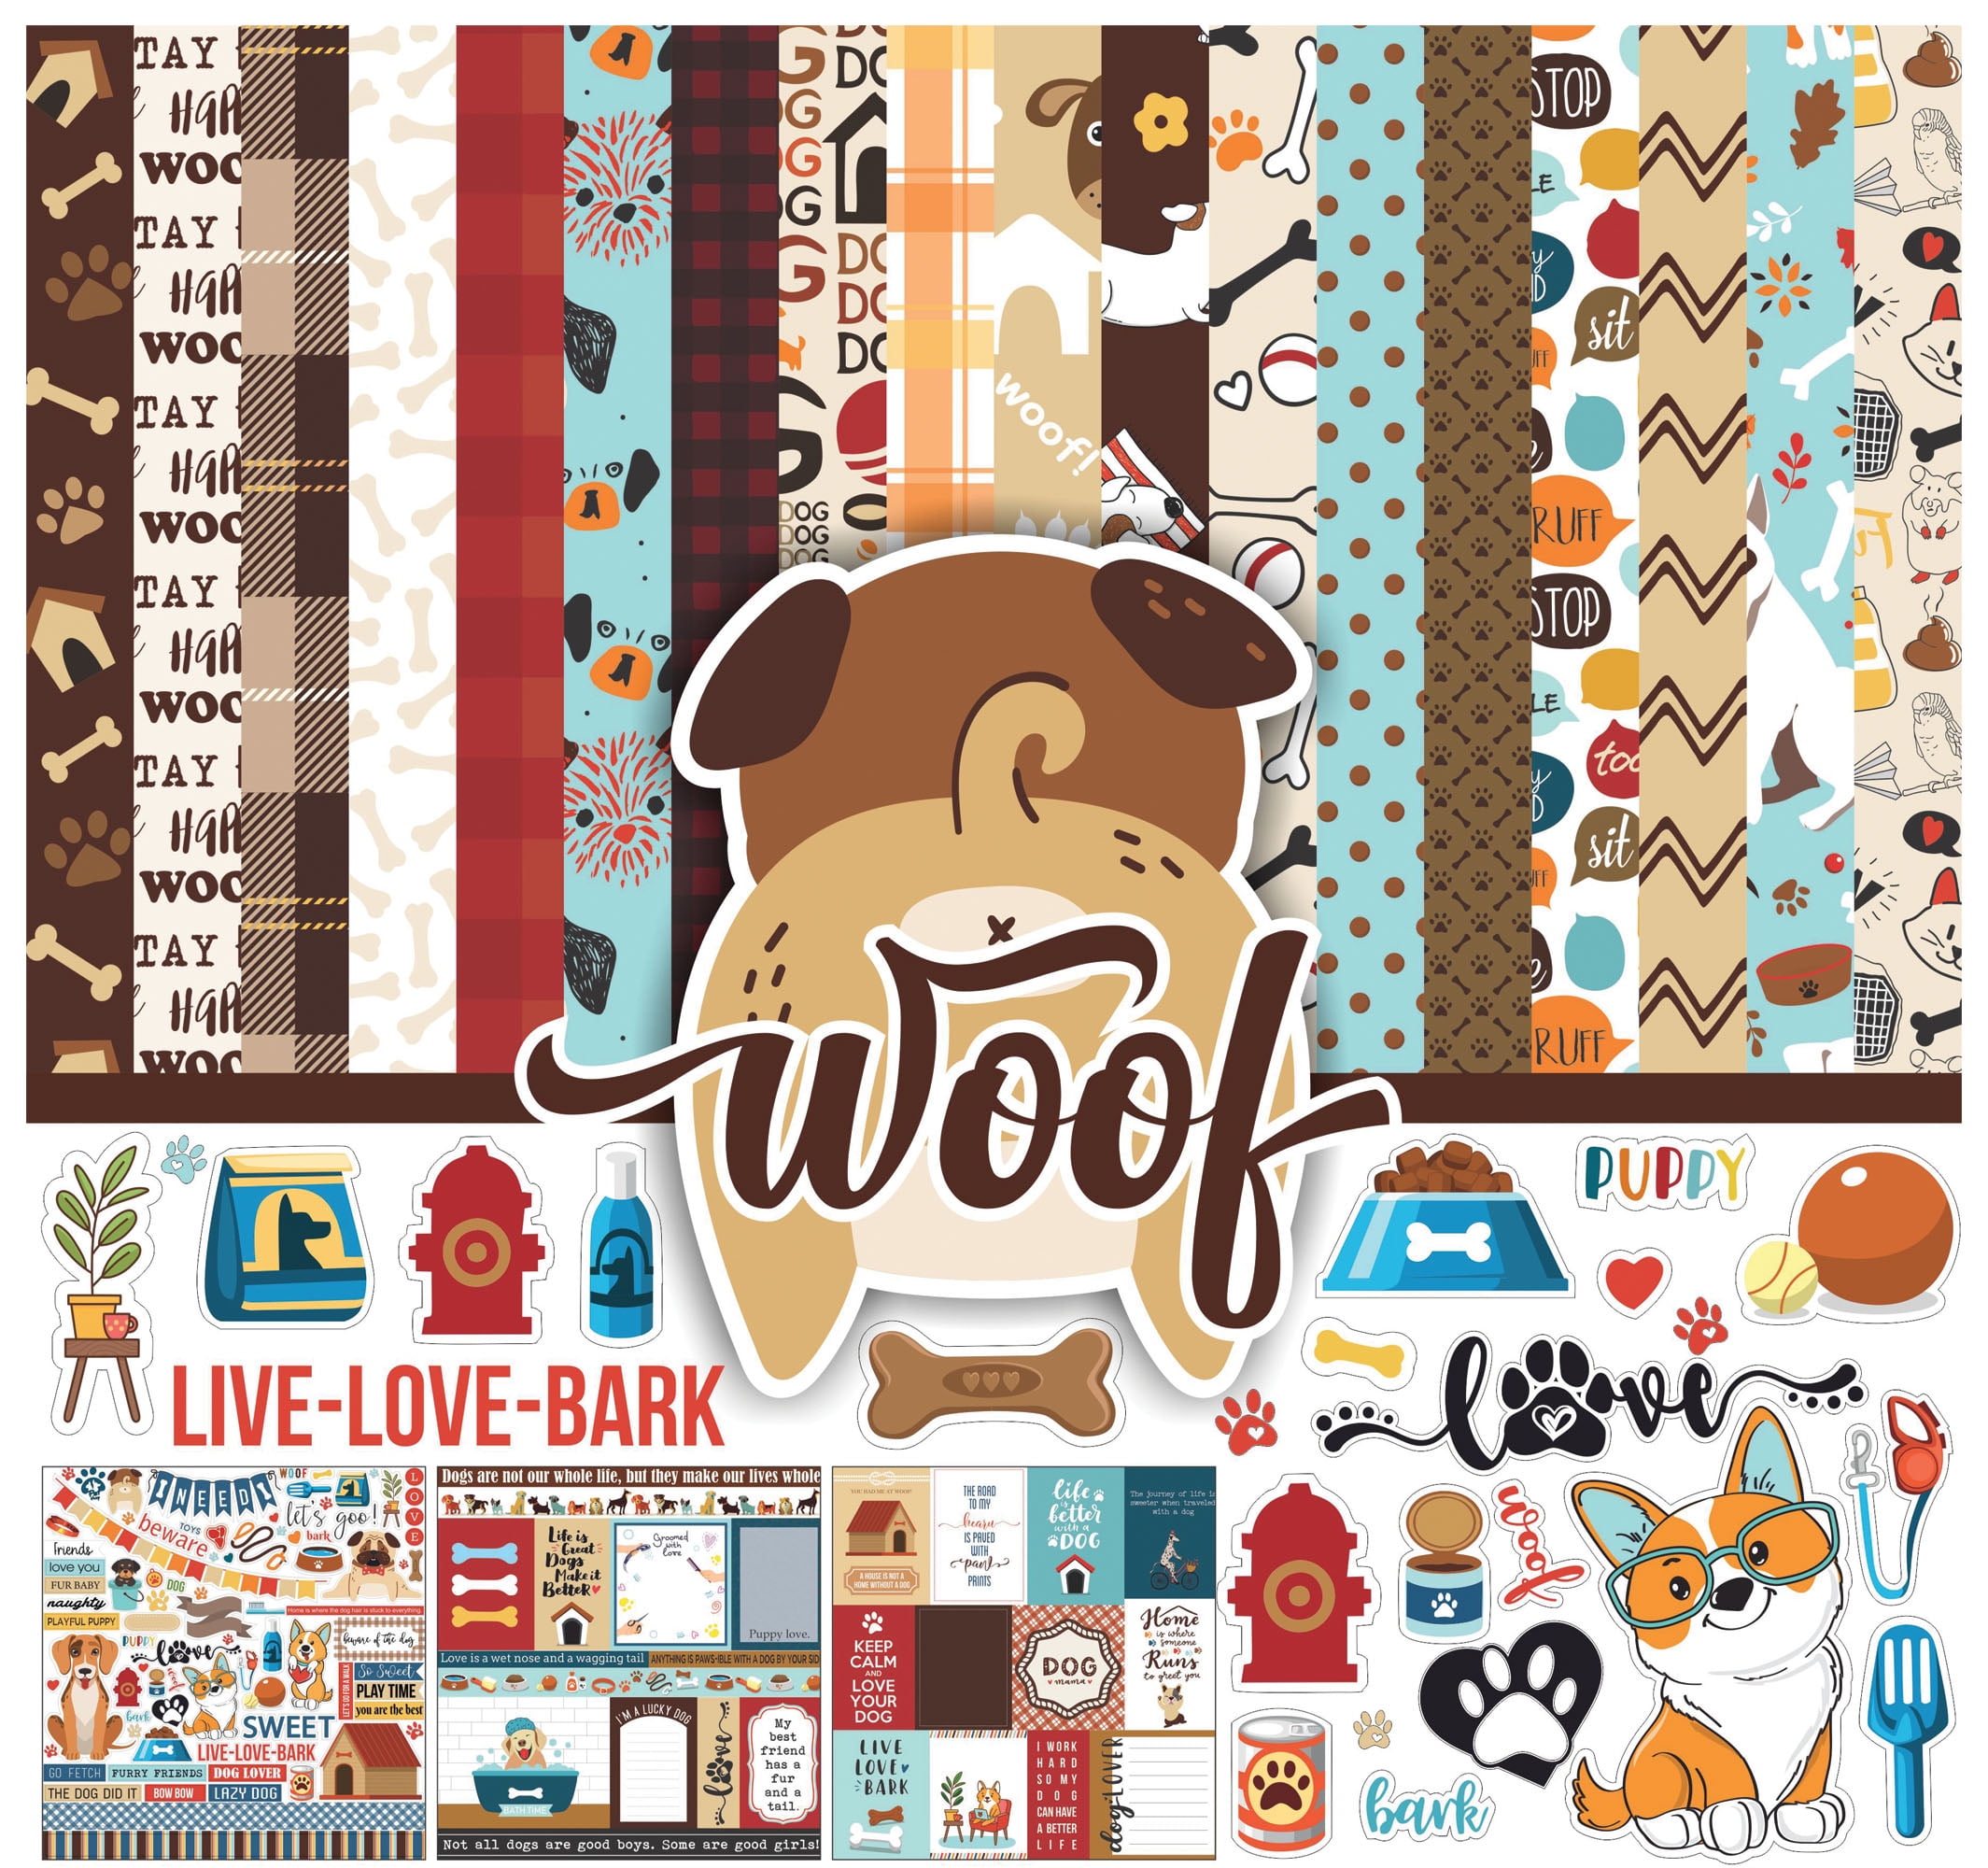 Dog Scrapbook Paper: Scrapbooking Paper size 8.5 x 11| Decorative Craft  Pages for Gift Wrapping, Journaling and Card Making | Premium Scrapbooking